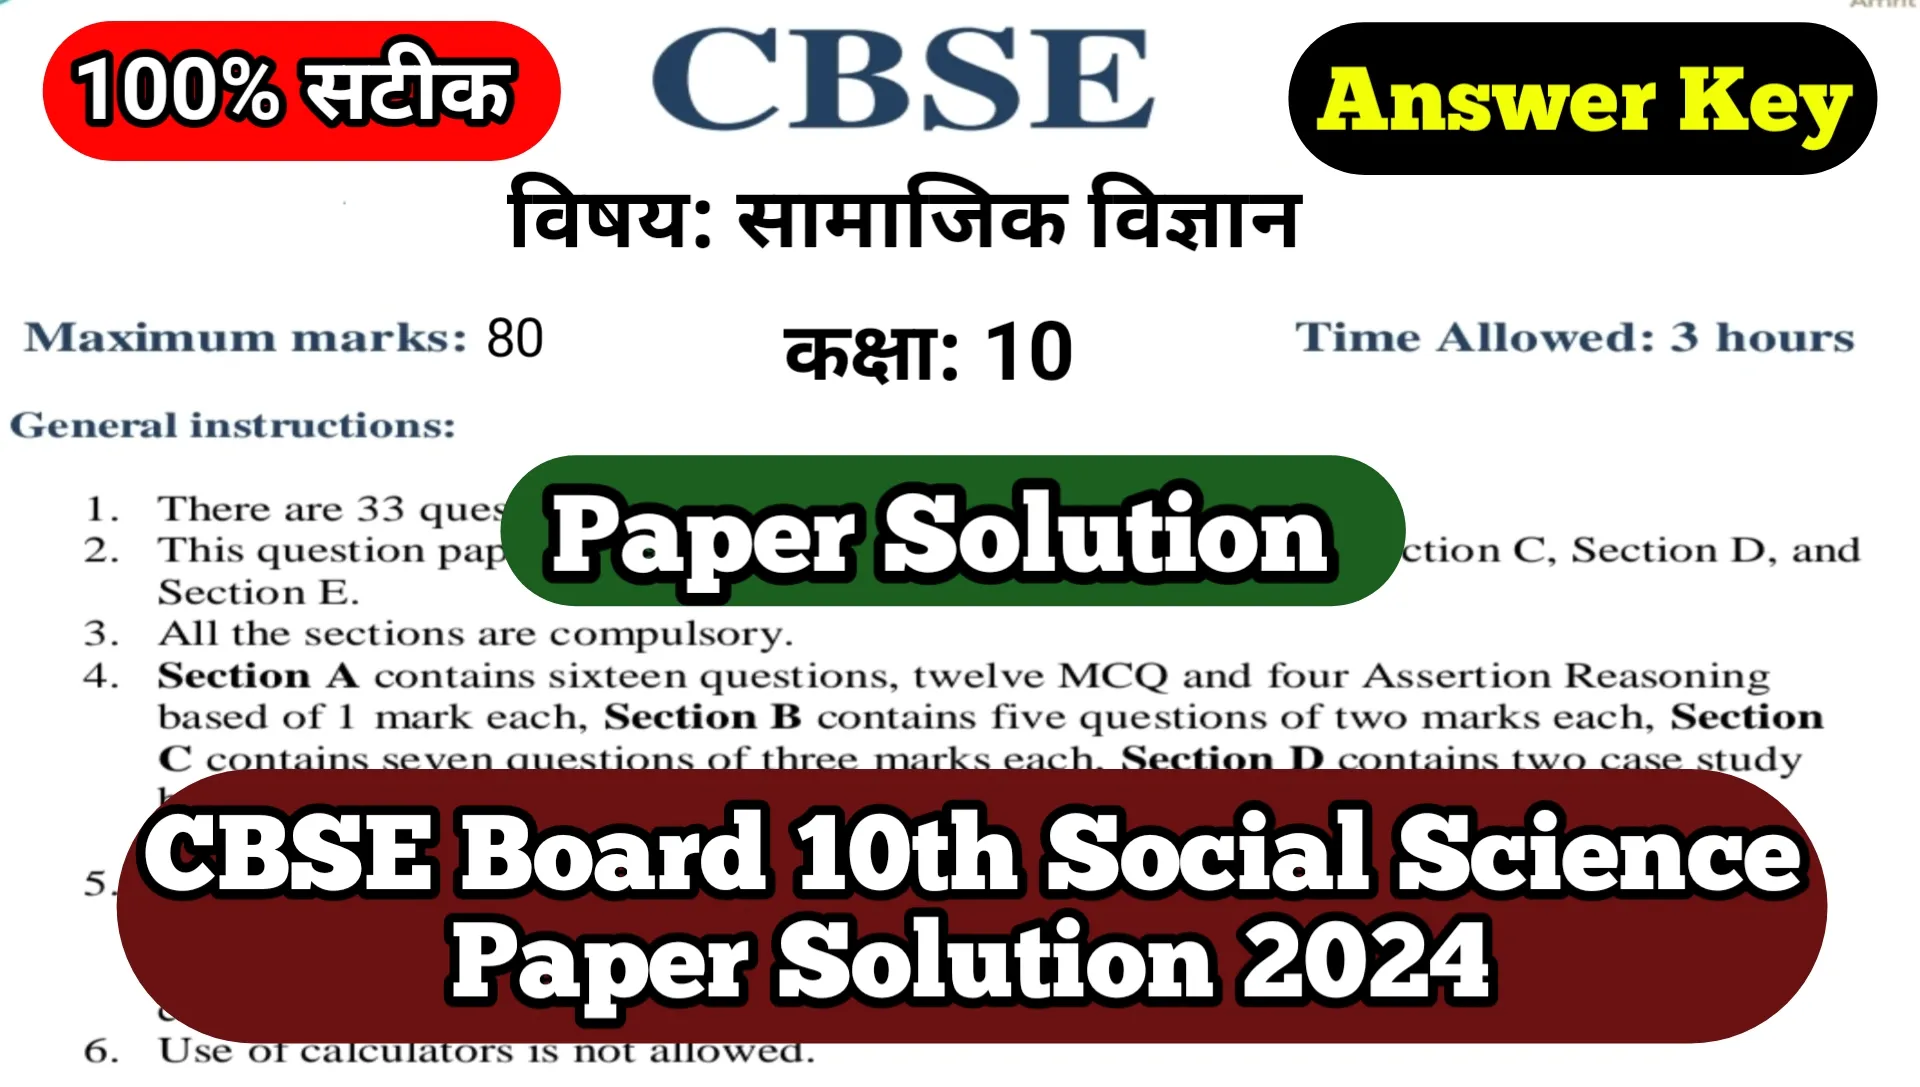 CBSE Board 10th Social Science Paper Solution 2024